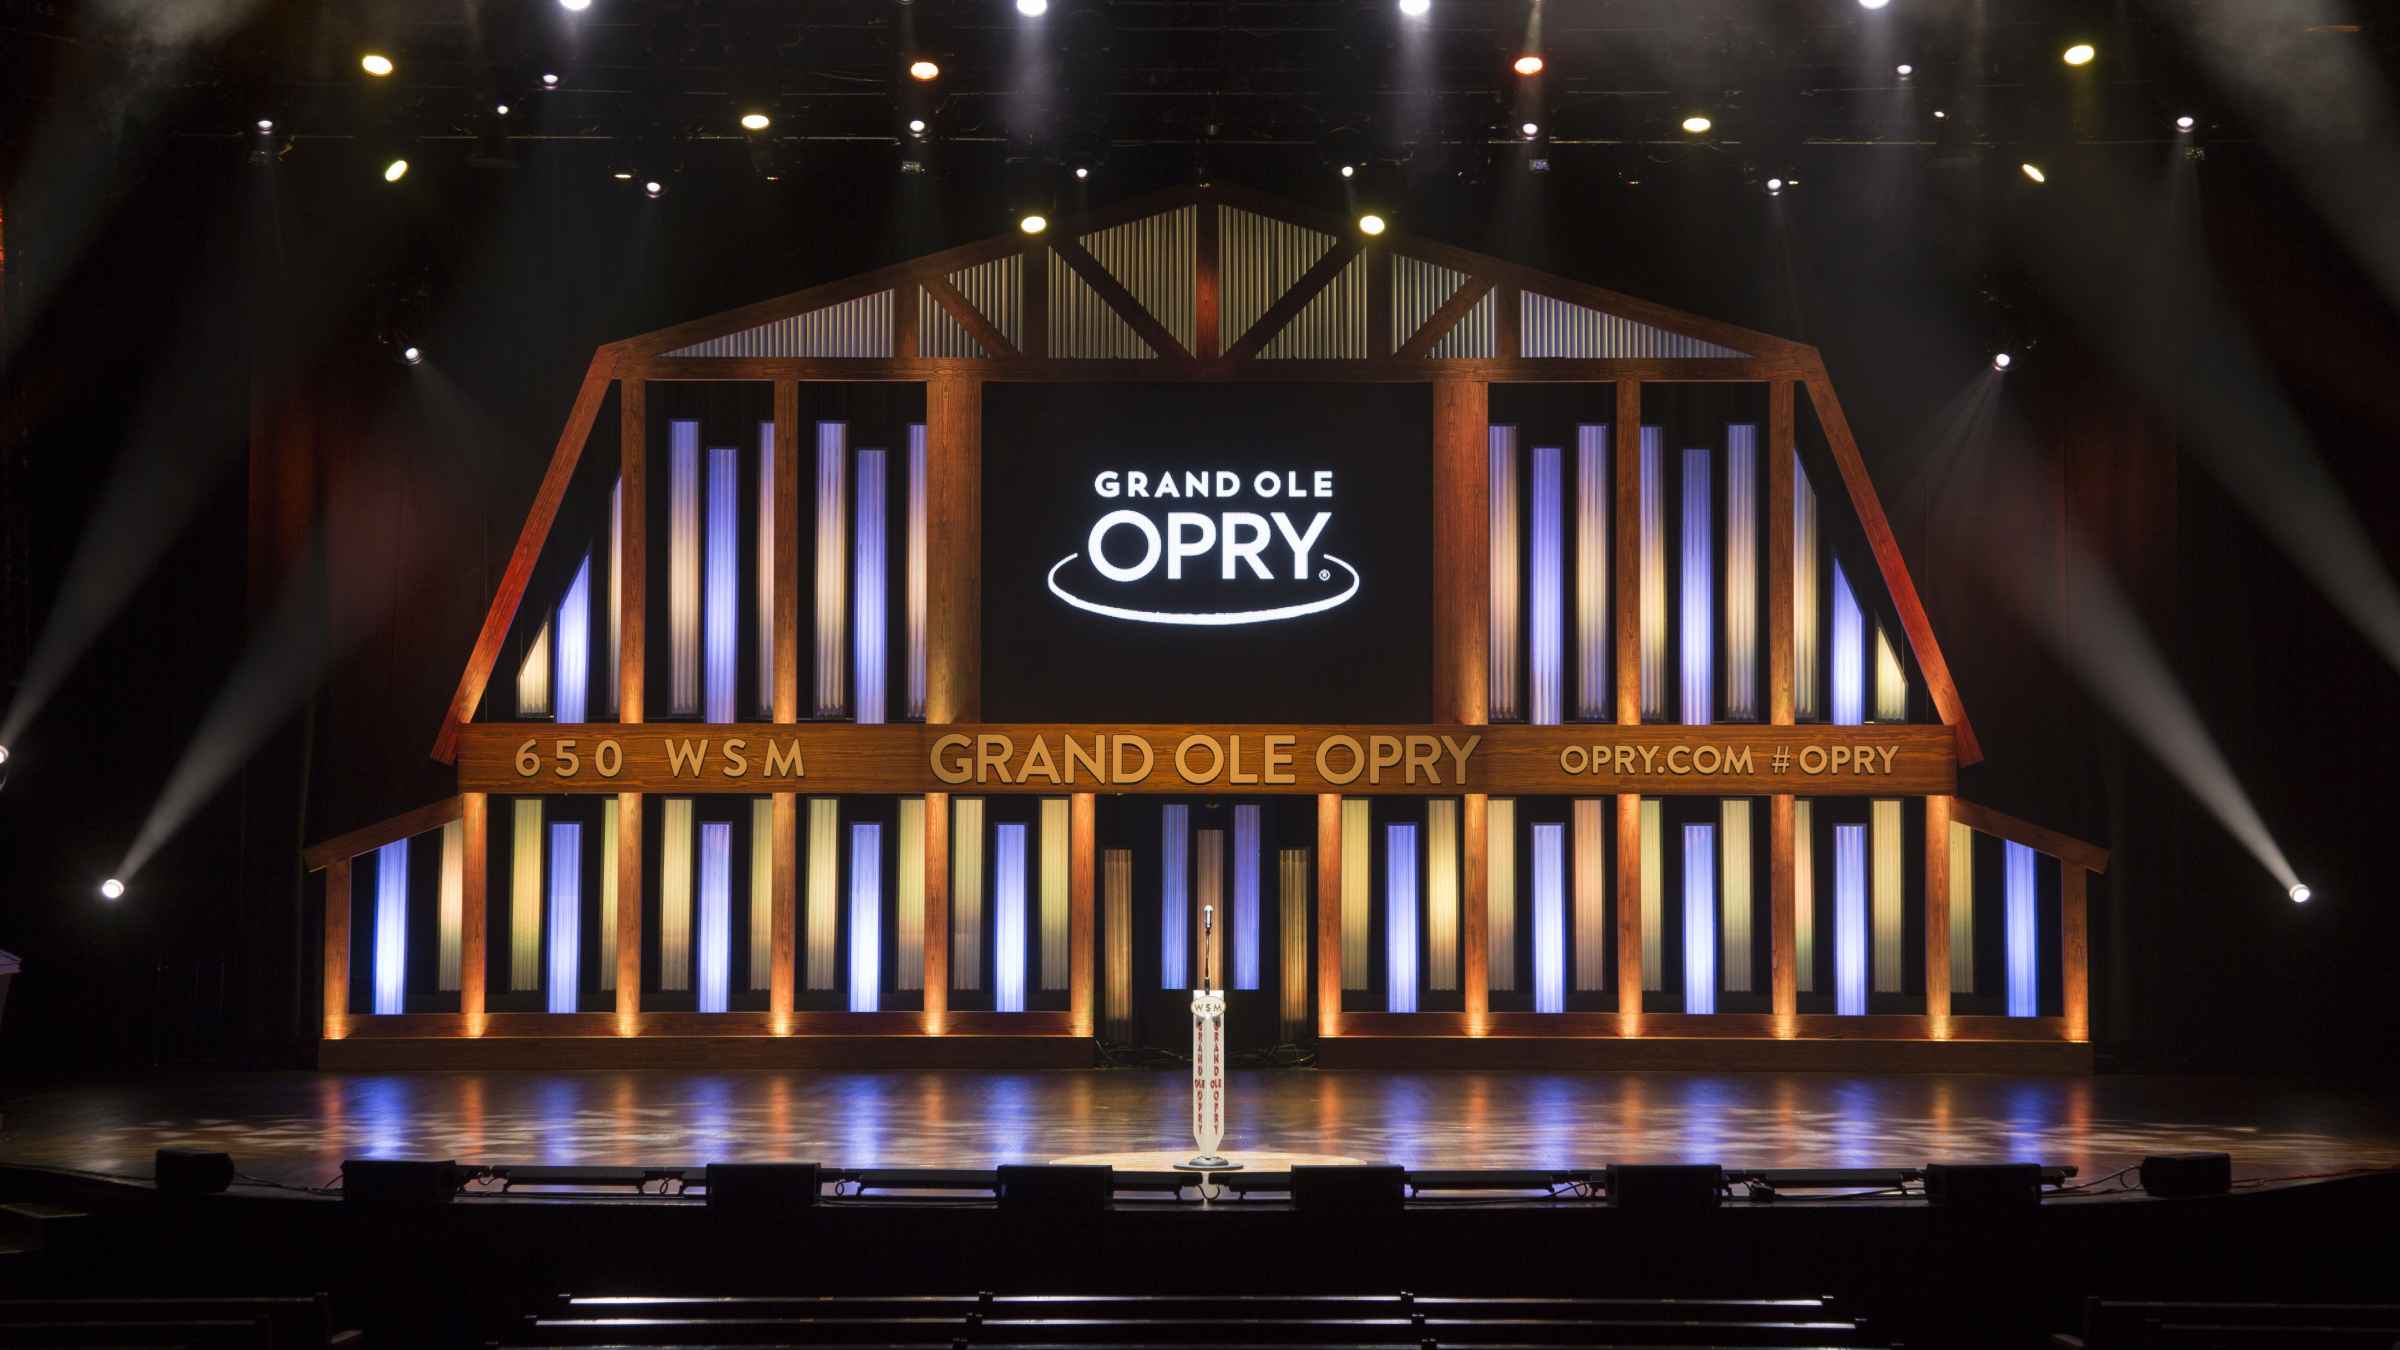 Grand Ole Opry, Nashville - Book Tickets & Tours | GetYourGuide